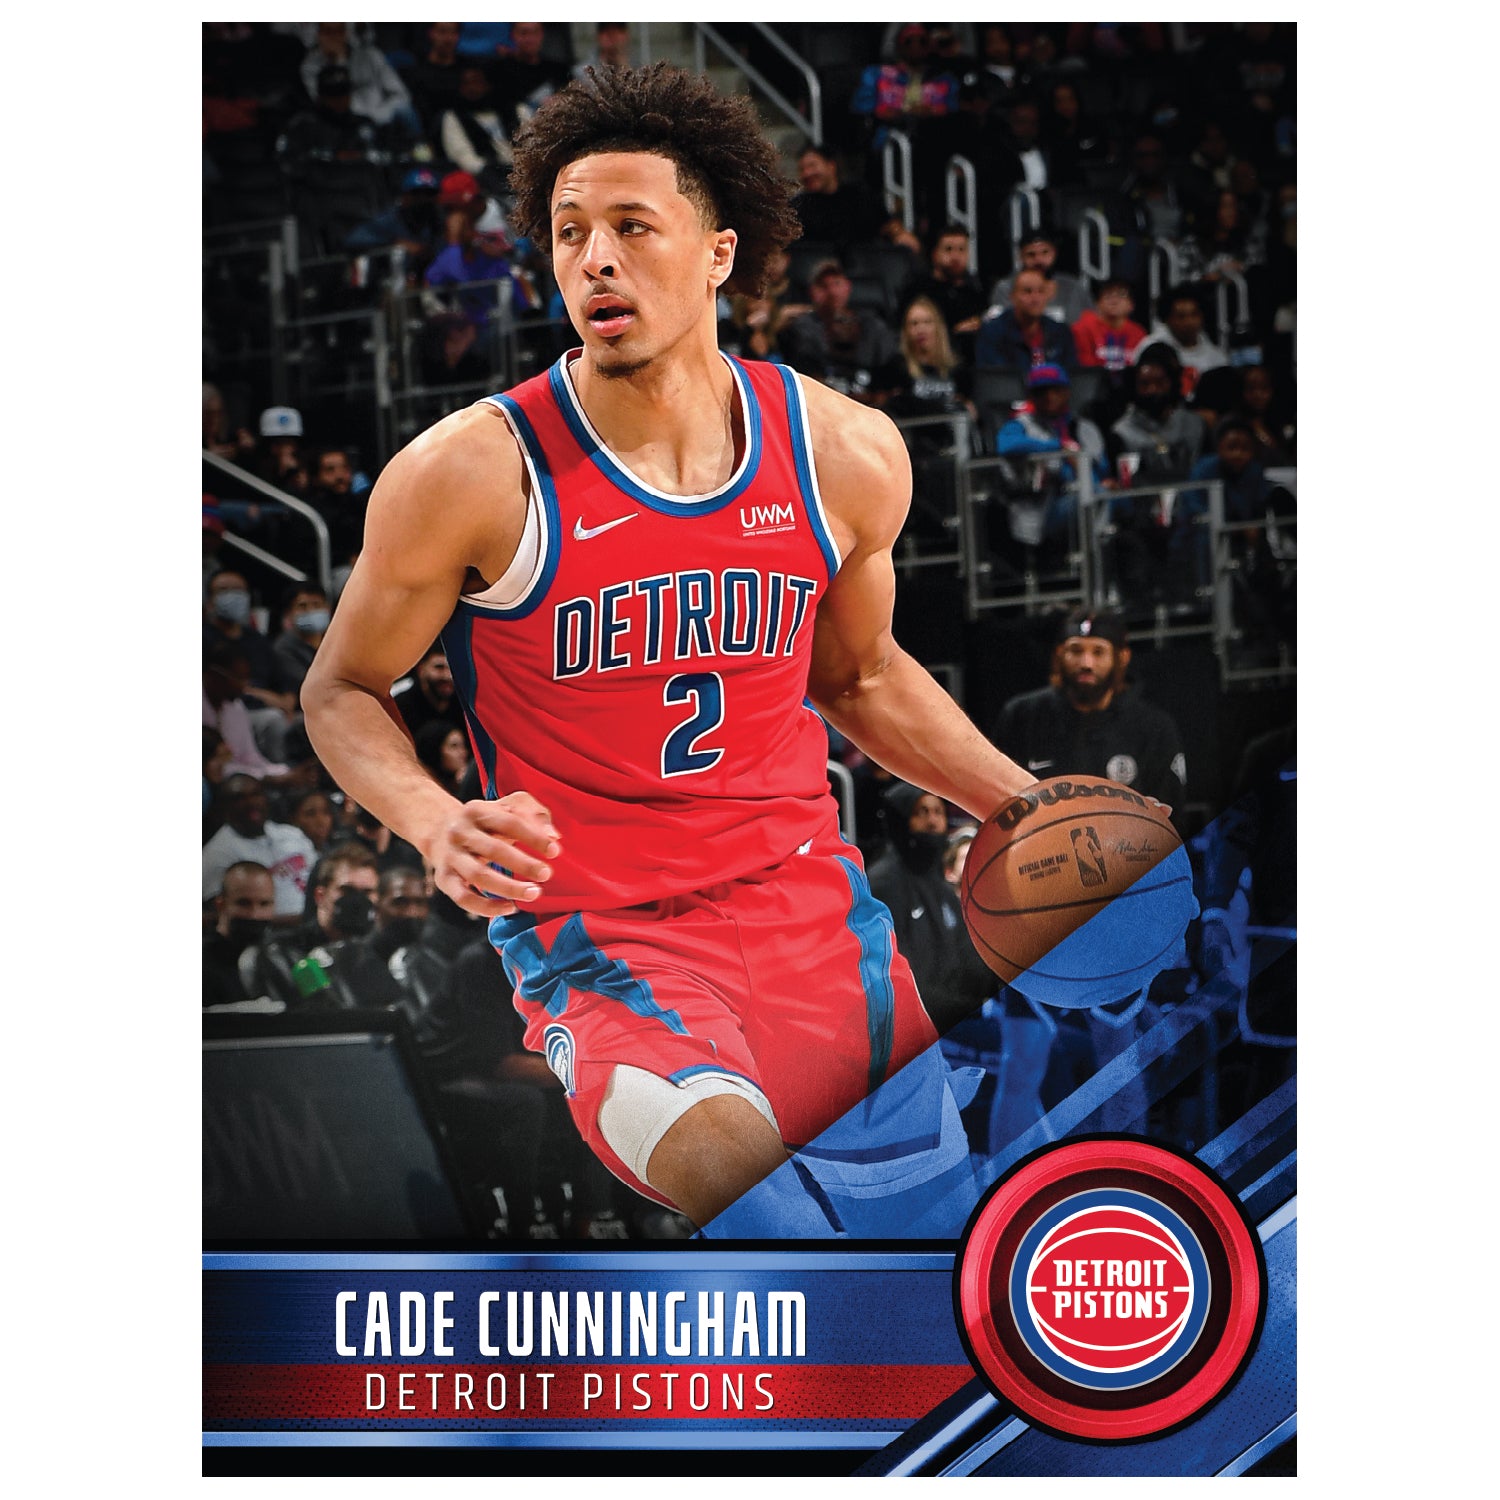 Cade Cunningham Posters for Sale